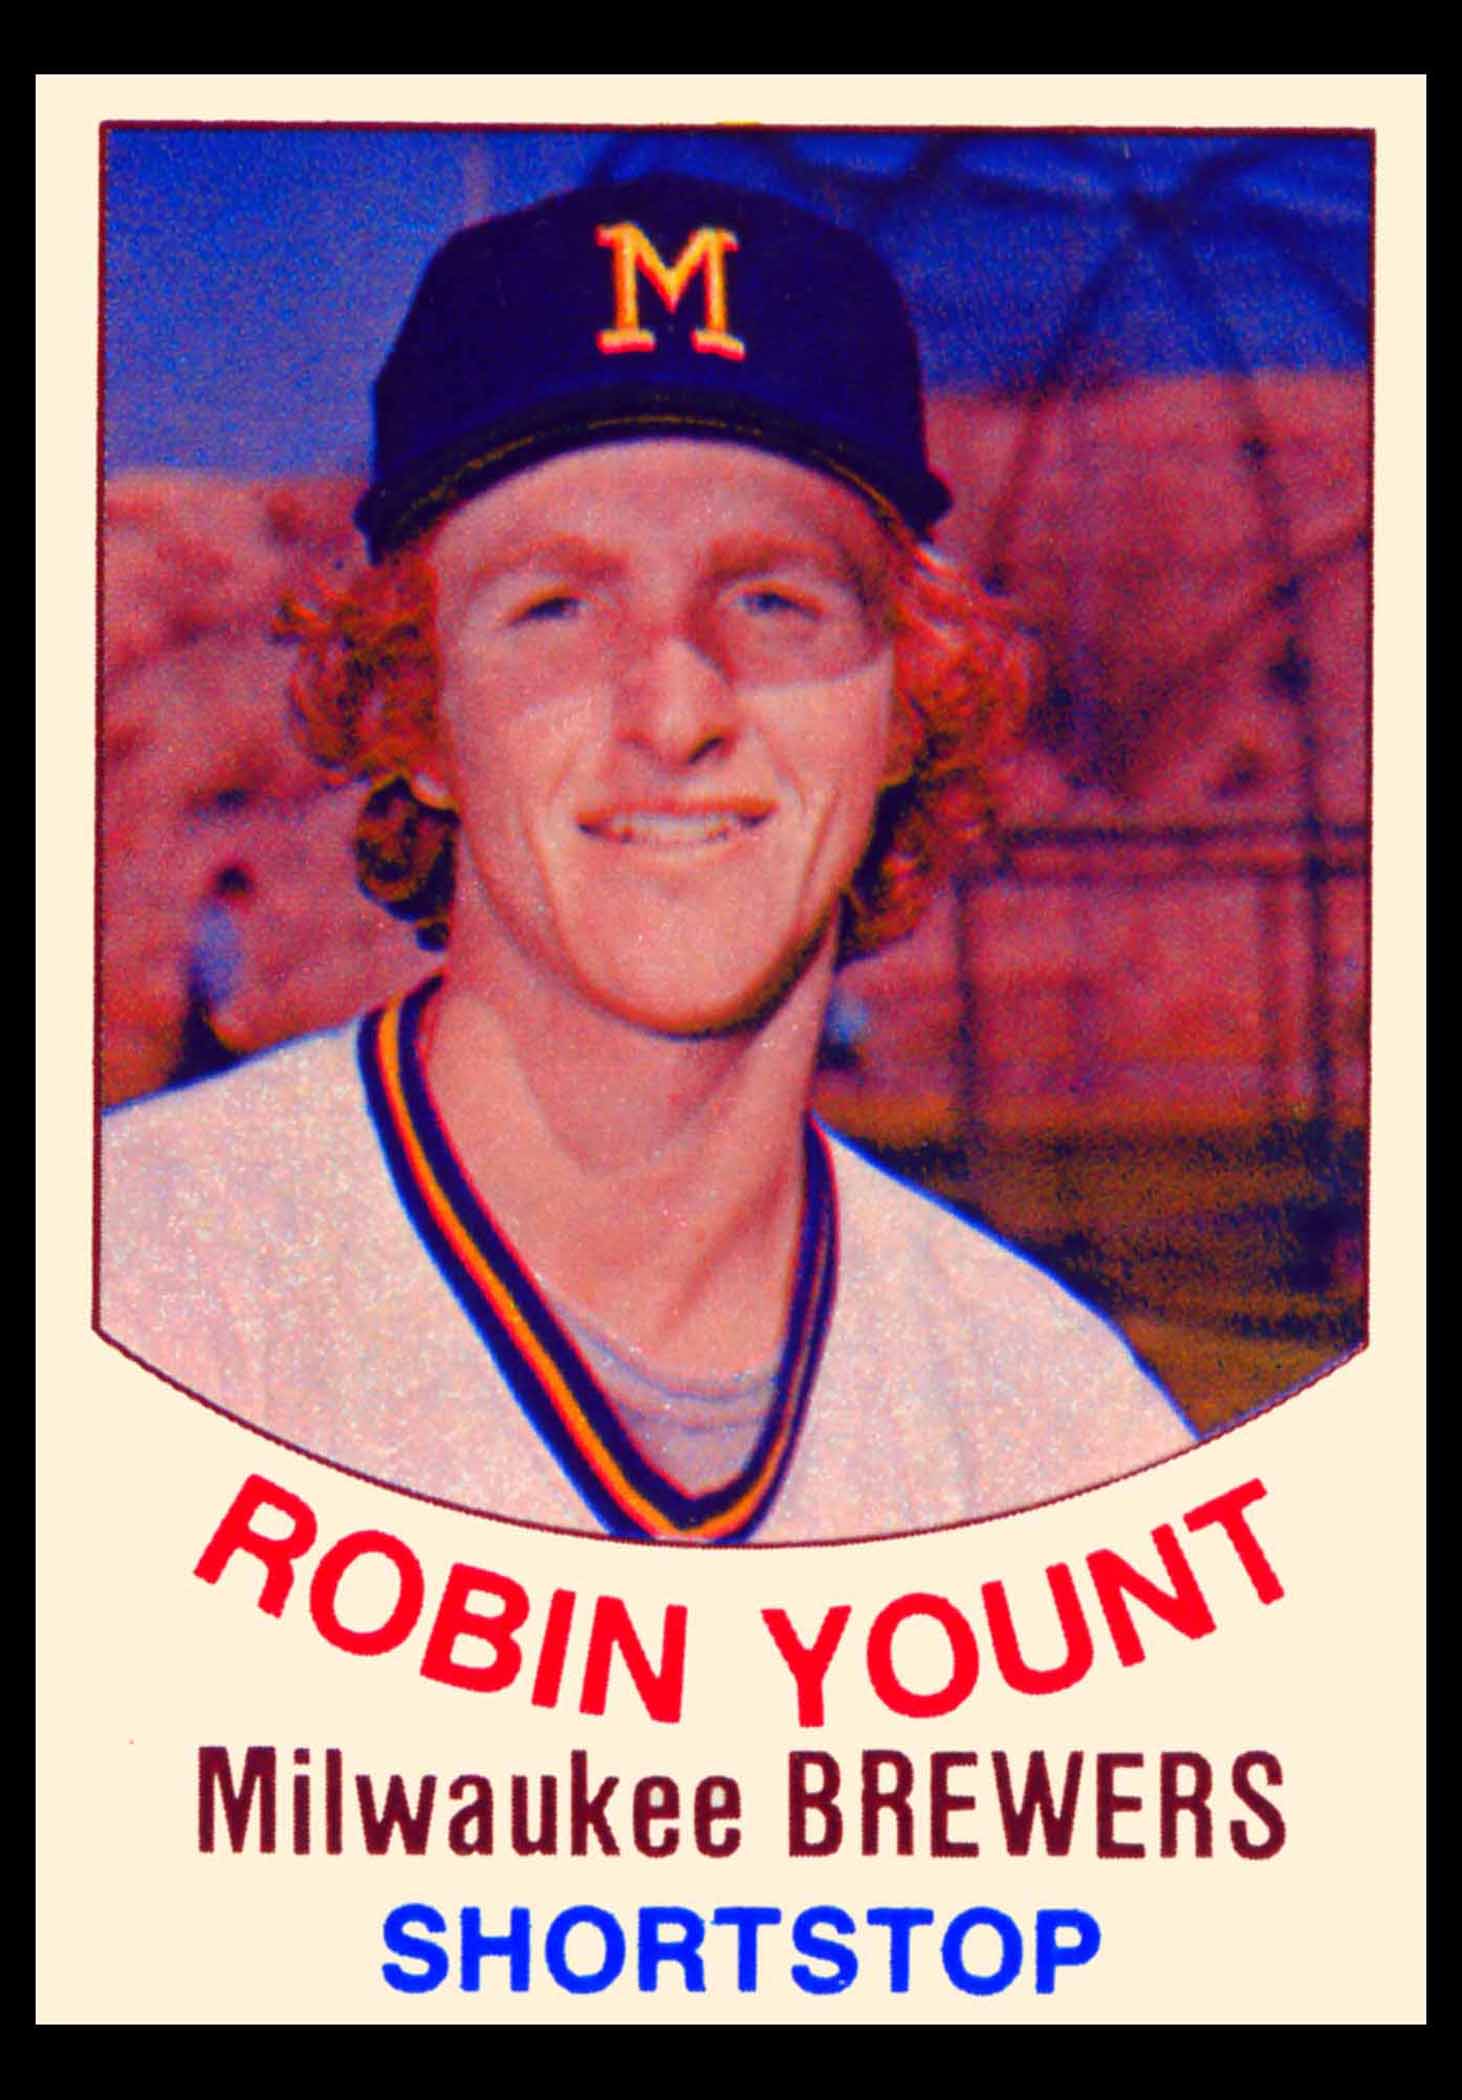 Robin Yount Gallery